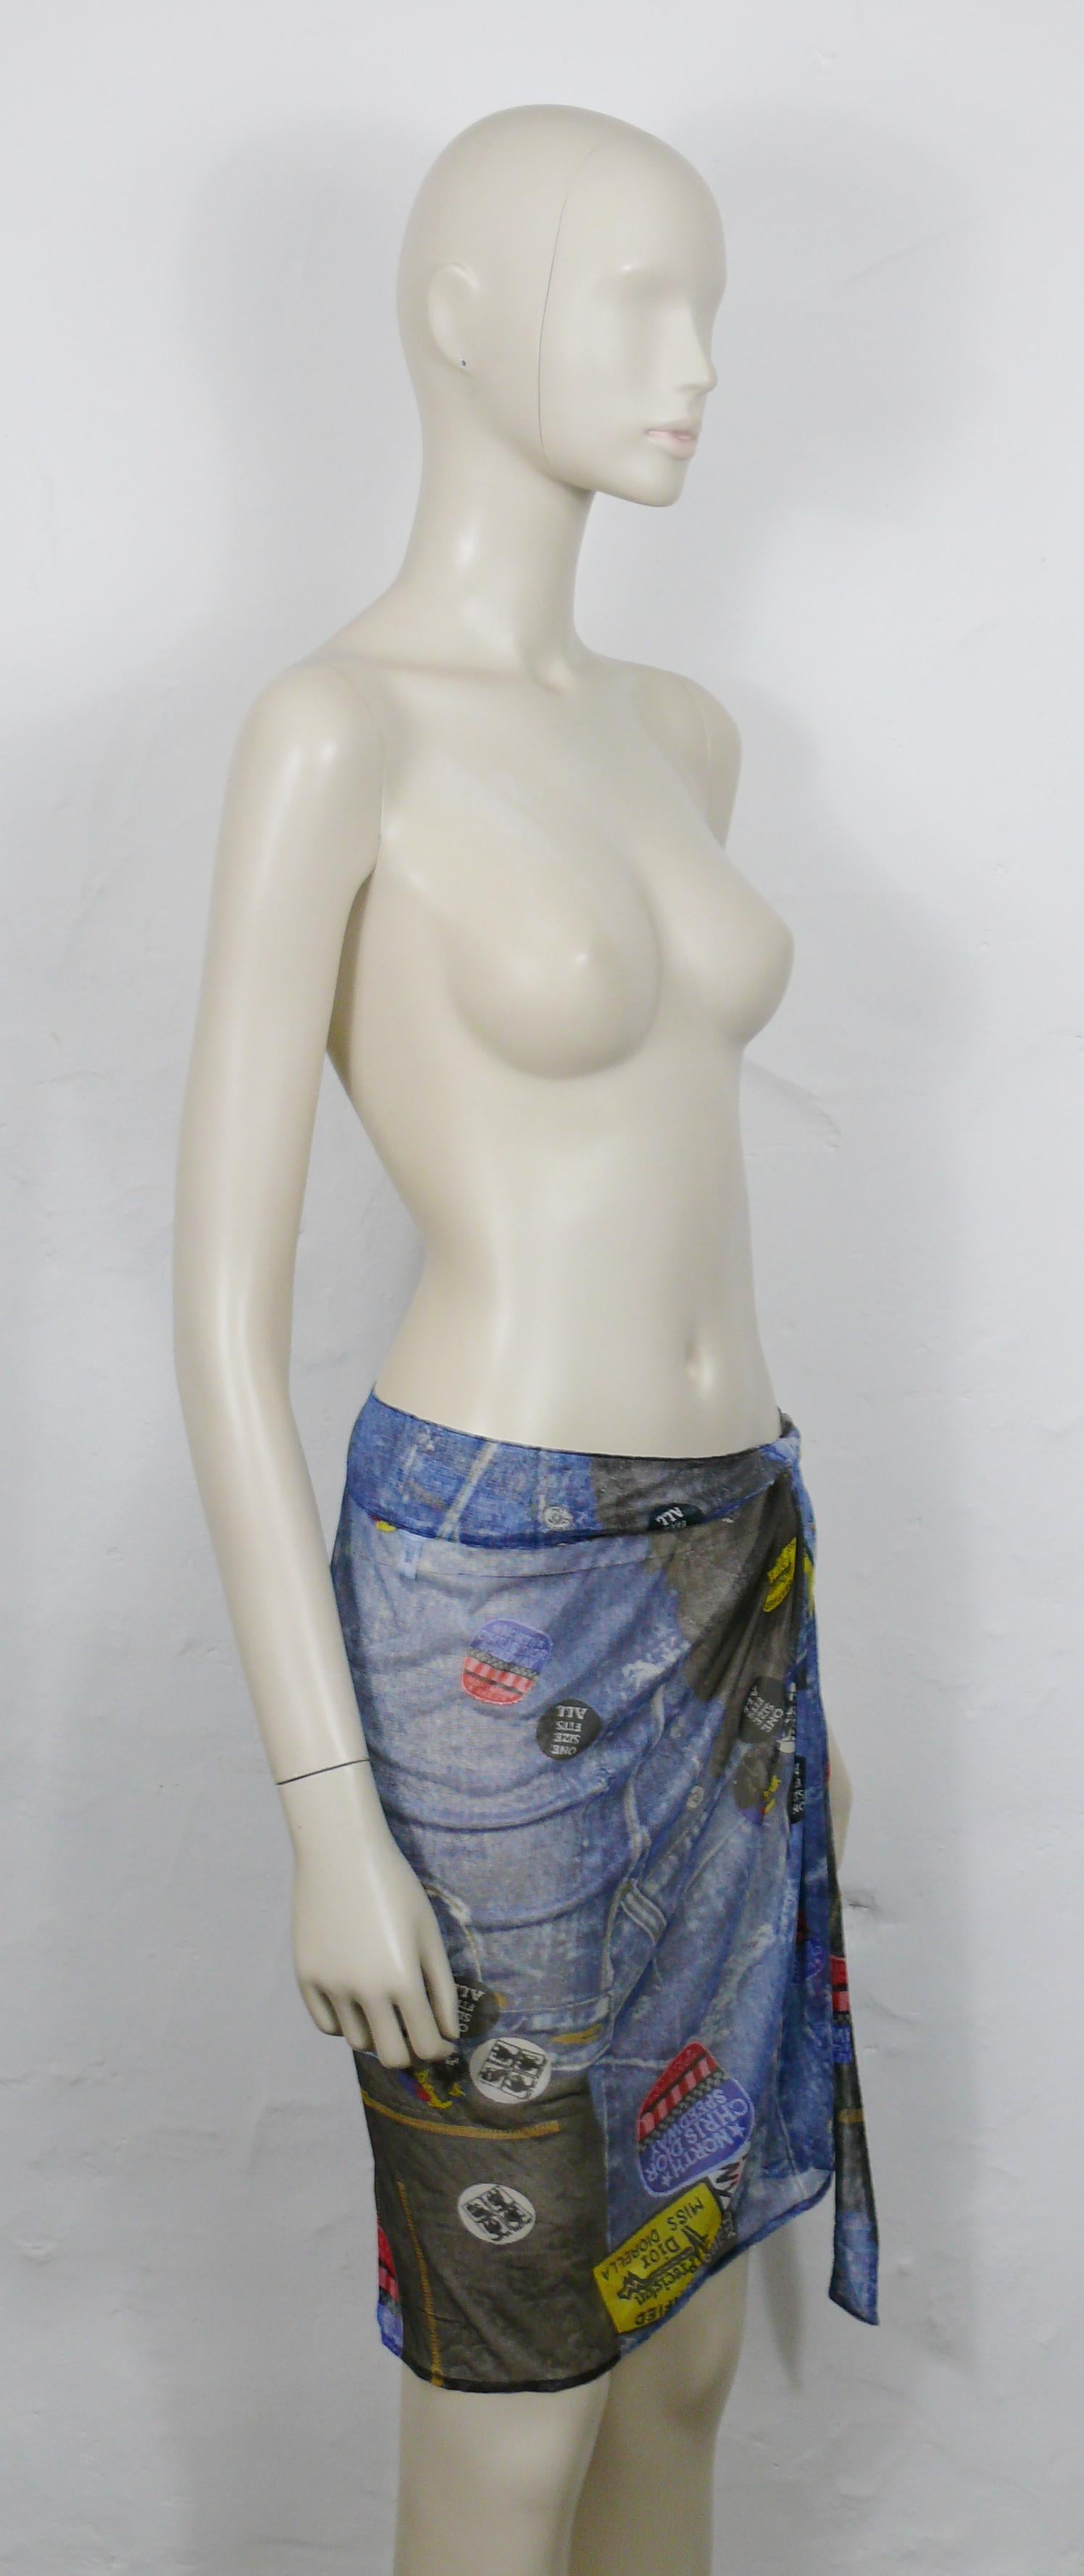 CHRISTIAN DIOR by JOHN GALLIANO vintage MISS DIORELLA wrap around sheer pareo featuring a denim trompe l'oeil print and patches.

Ties at the waist.

Label reads CHRISTIAN DIOR.
Made in France.

Missing size and composition tags.
Please refer to